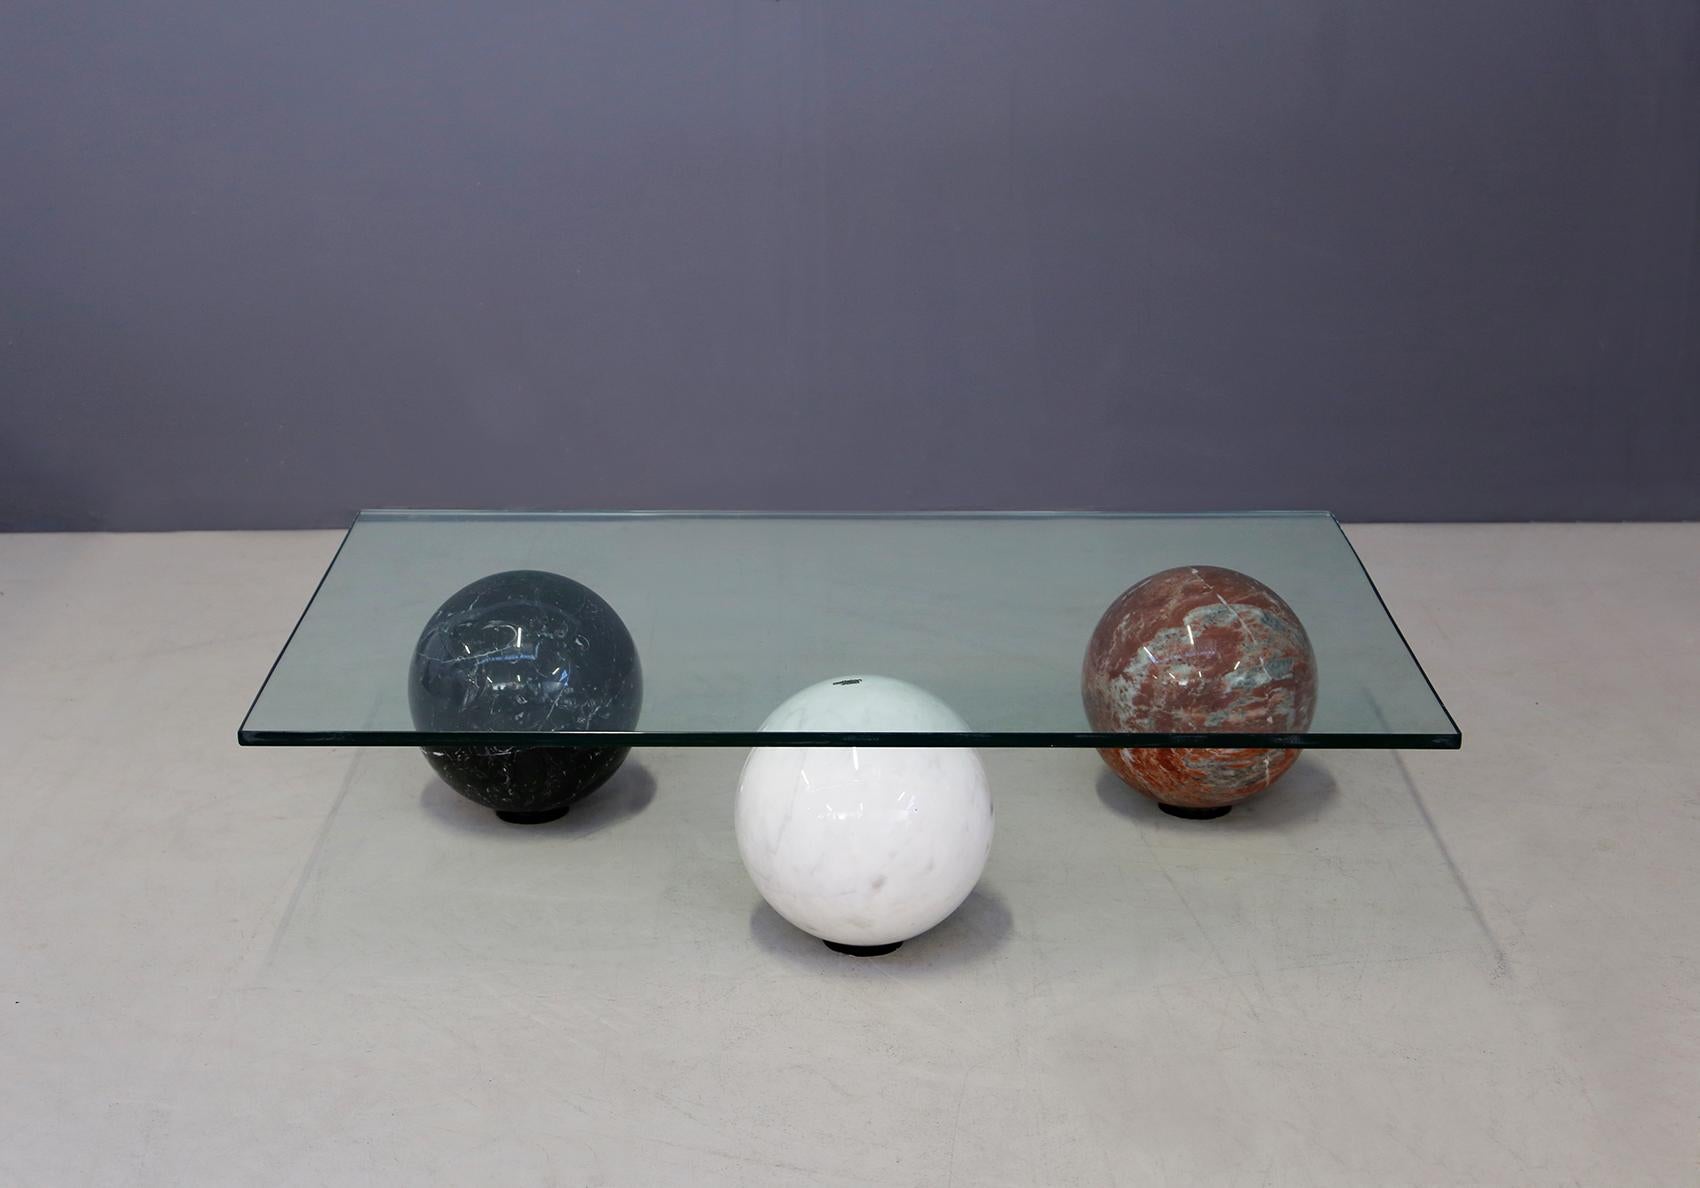 Elegant and modern coffee table made by the prestigious Italian manufacturer Cattelan Italia, with the brand engraved in brass on the white sphere. The coffee table is made with three different marble spheres, Carrara white, black, and burgundy red.